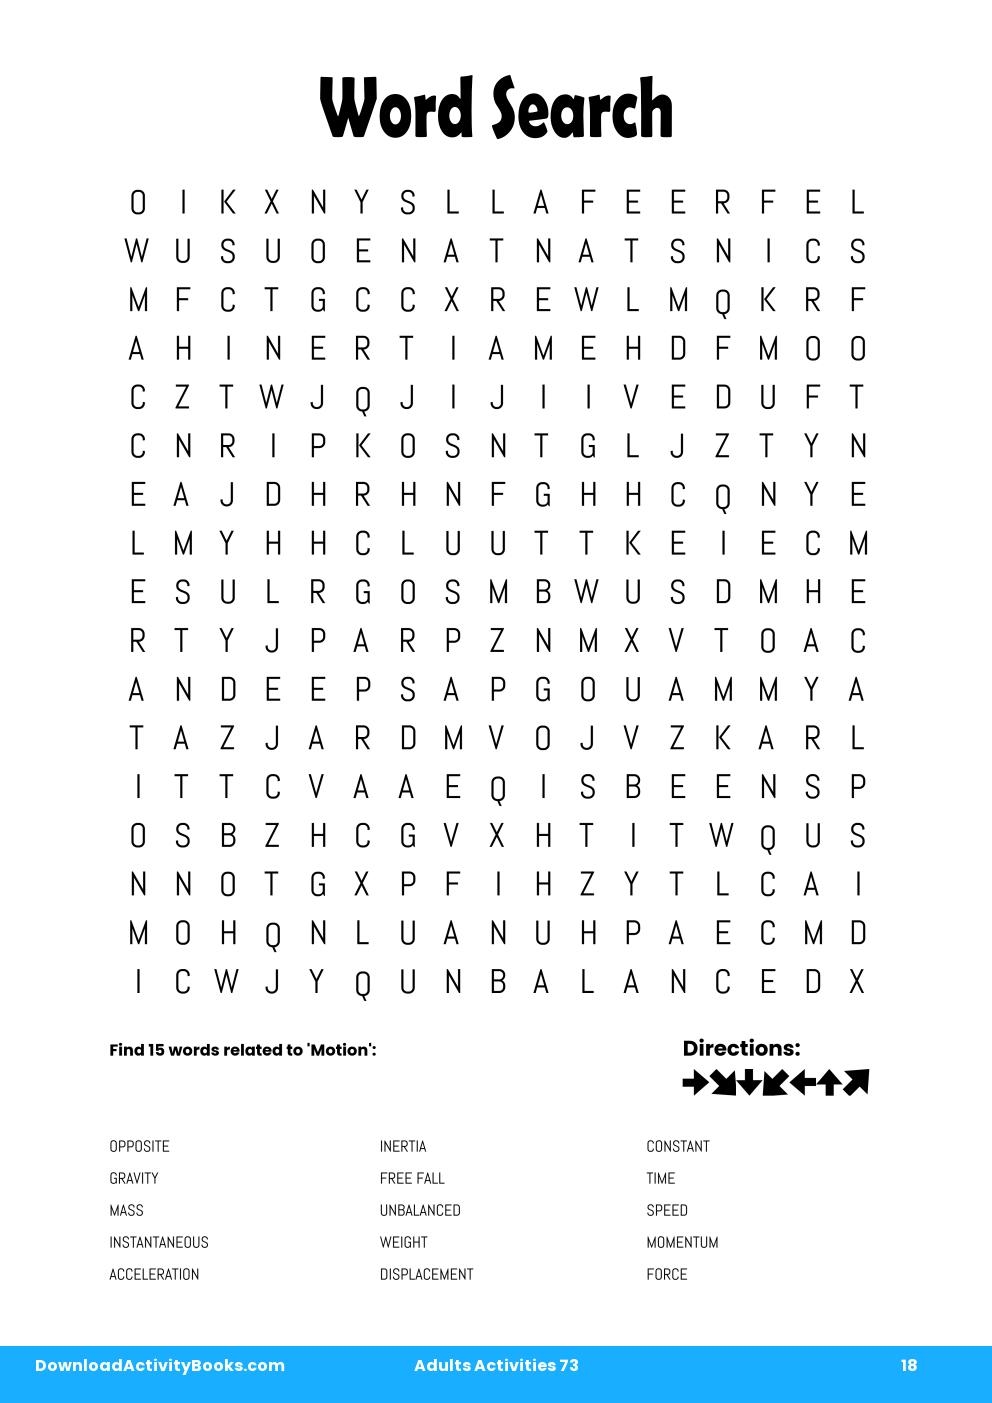 Word Search in Adults Activities 73